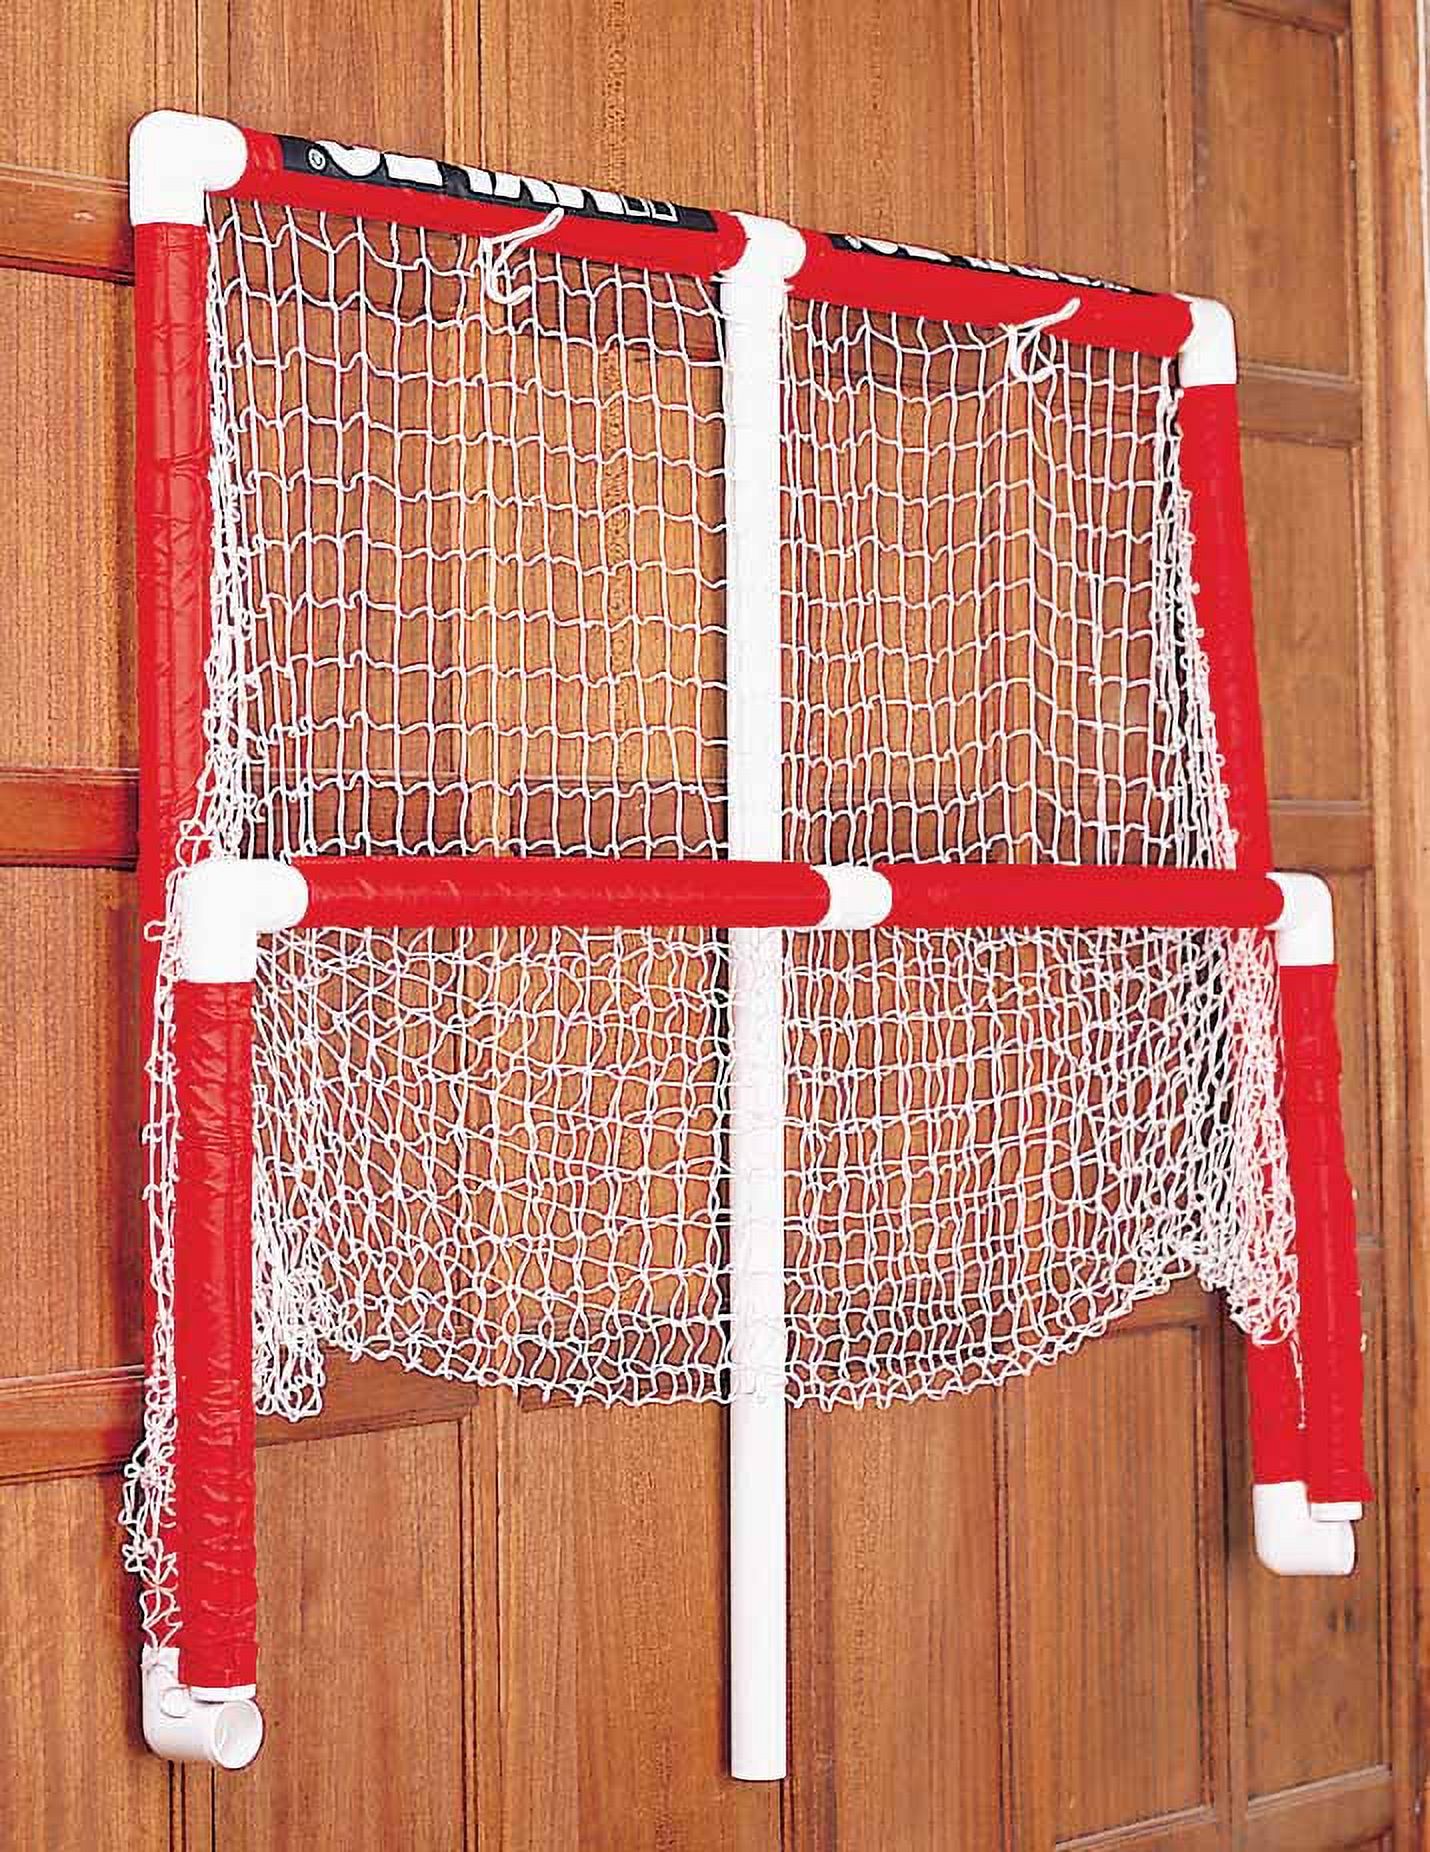 Mylec Easy Assemble Junior PVC Hockey Goal for Indoor + Outdoor - 54"W x 44"H x 24"D - 15 Pounds - Light + Portable - image 3 of 3